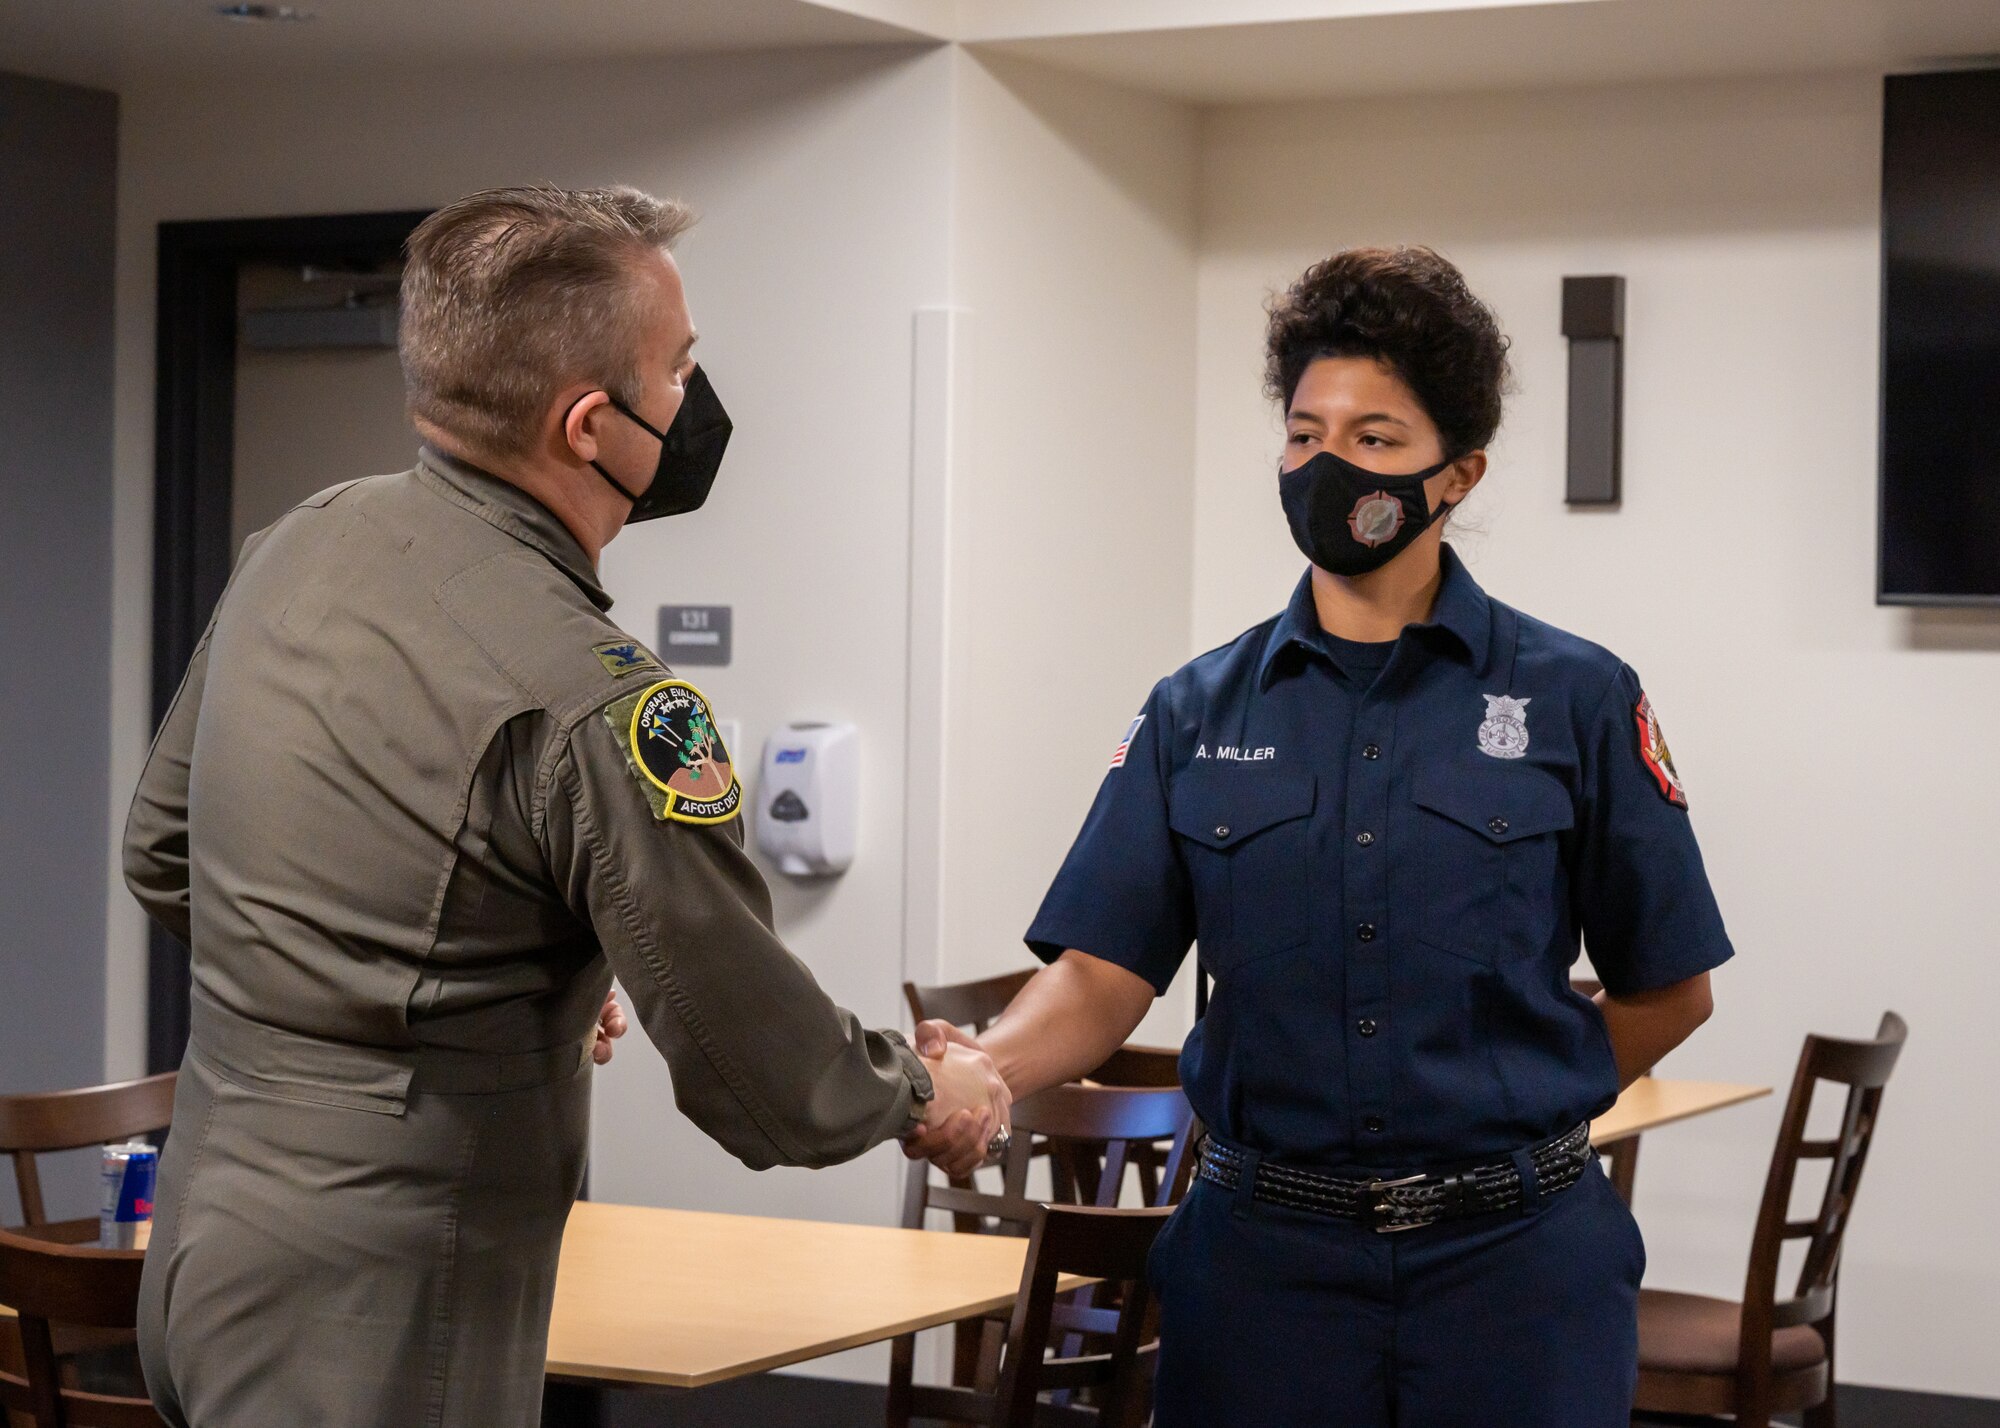 Col. Glenn Rineheart, Air Force Operational Test and Evaluation Center, Detachment 5 Commander, presents a coin to Emergency Medical Technician Alysha Miller at Edwards Air Force Base, California, Dec. 1. Miller and fellow EMTs were the first responders to a medical emergency involving an AFOTEC Det. 5 team member. Rineheart credits base emergency personnel for possibly saving the individual's life. (Air Force photo by Giancarlo Casem)